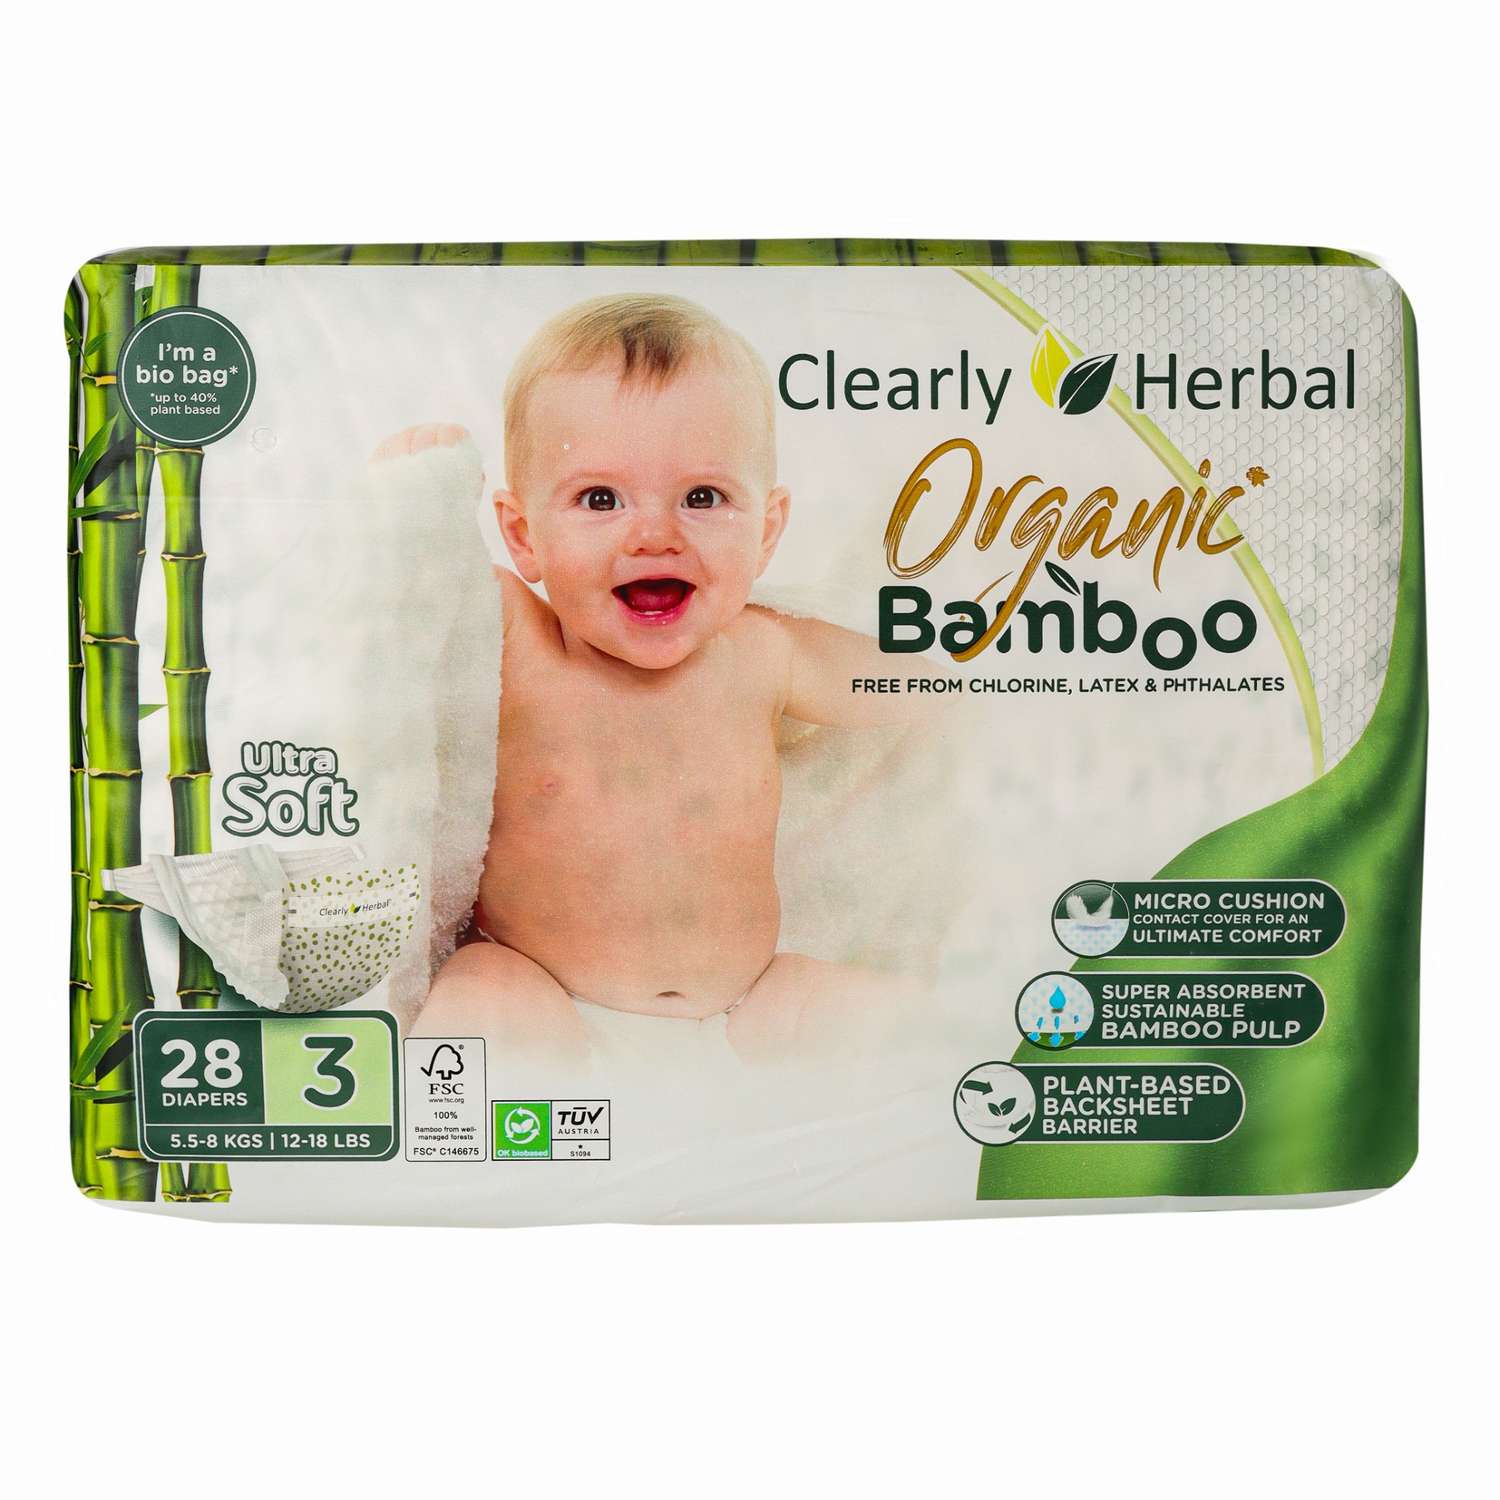 Clear child. Подгузники clearly Herbal.